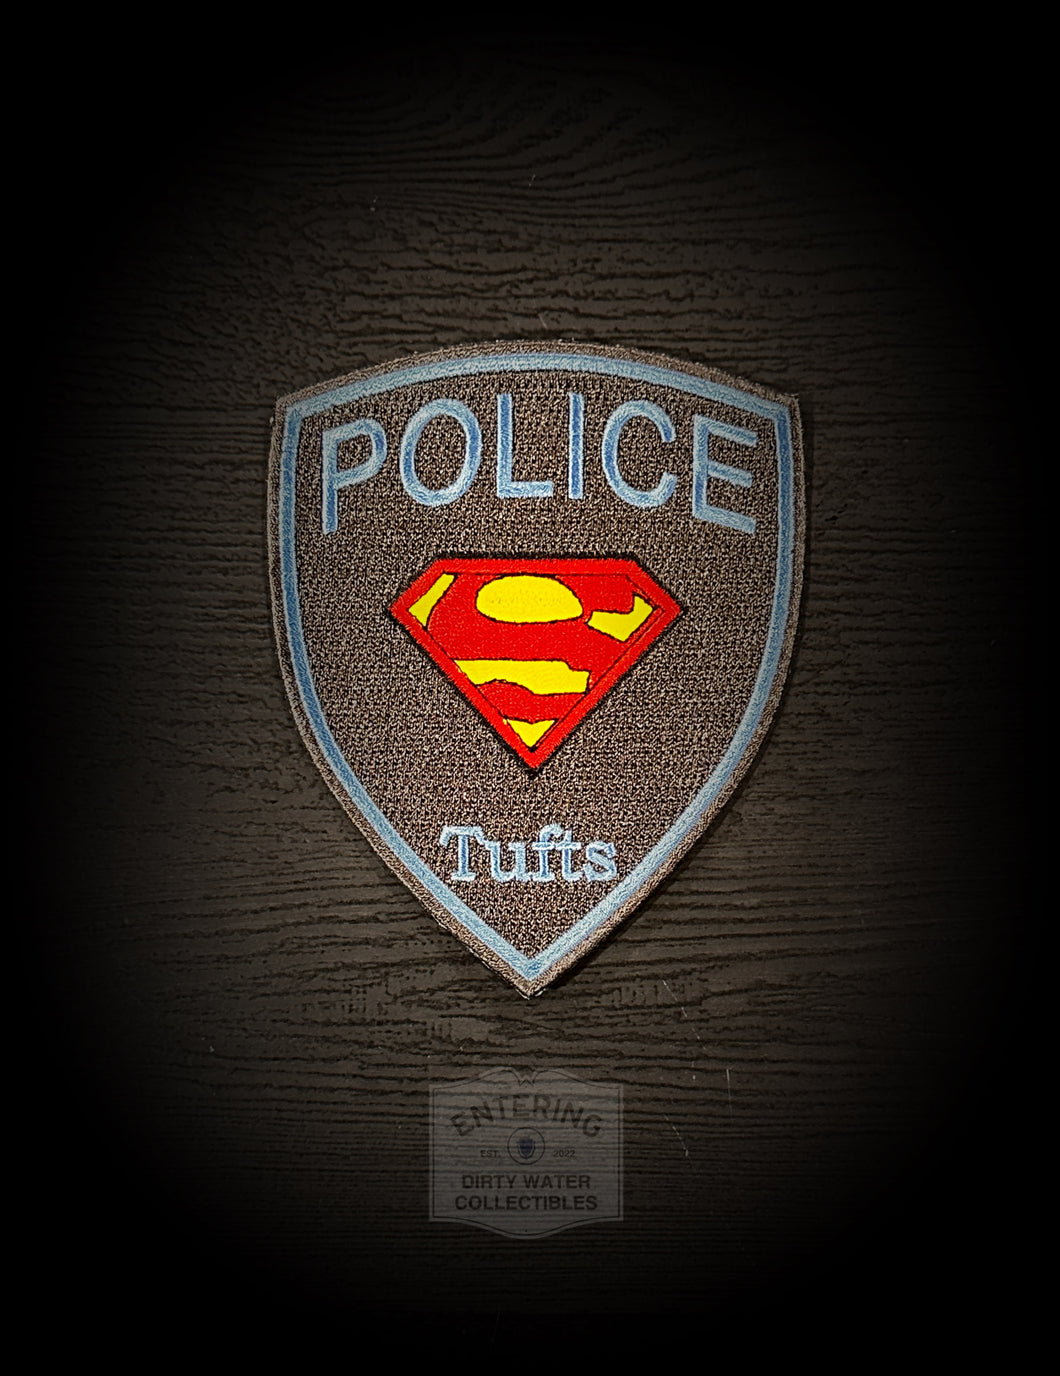 Tufts University MA PD Superman Cosplay patch